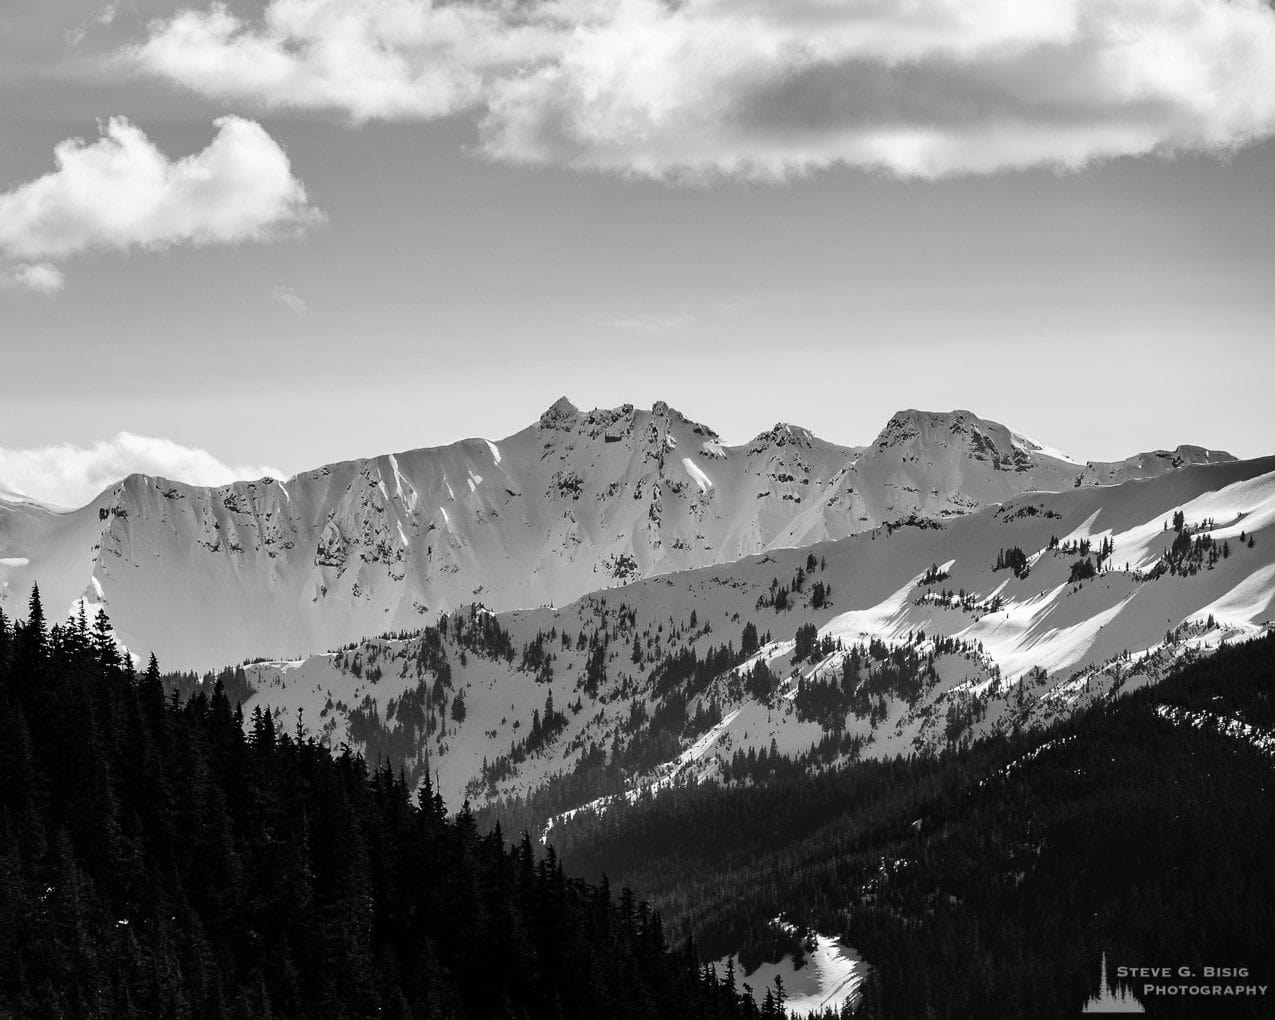 A black and white landscape photograph of the snow covered mountain ranges in the Goat Rocks Wilderness Area as viewed from Gifford Pinchot National Forest Road 1284 in Lewis County, Washington.